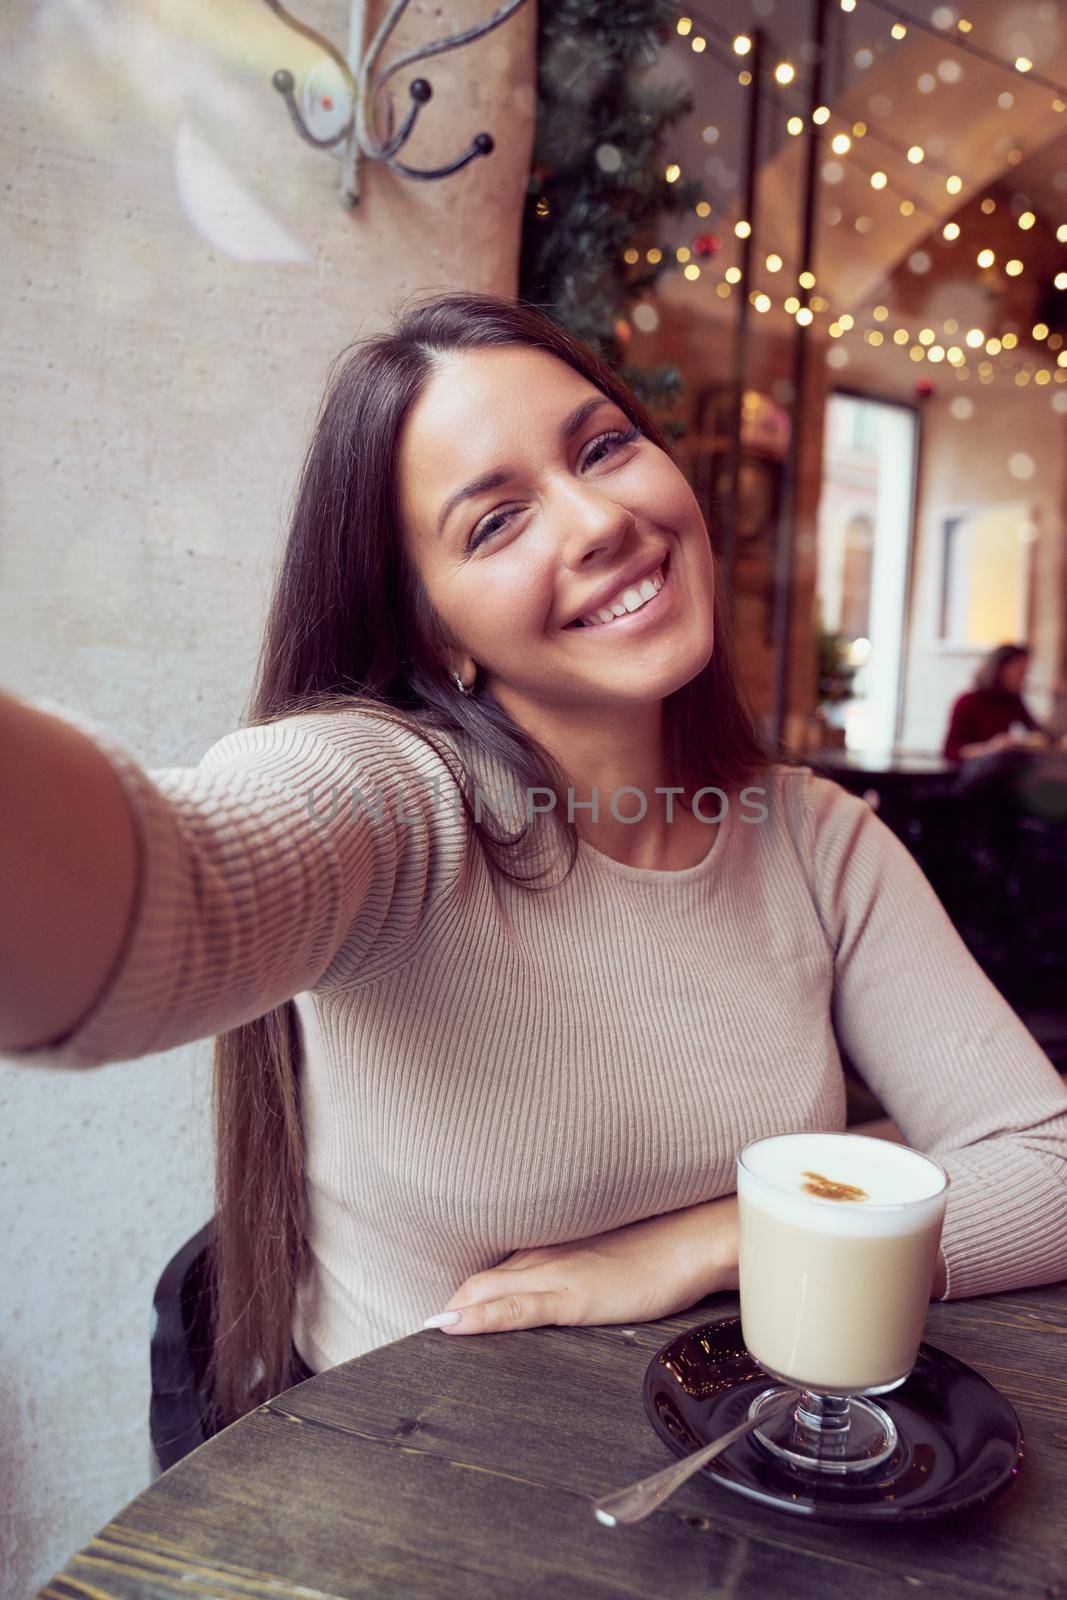 Beautiful happy girl taking a selfie in cafe during Christmas holidays, smiling and looking at phone. Brunette woman with long hair drinks cappuccino coffee, latte, vertical